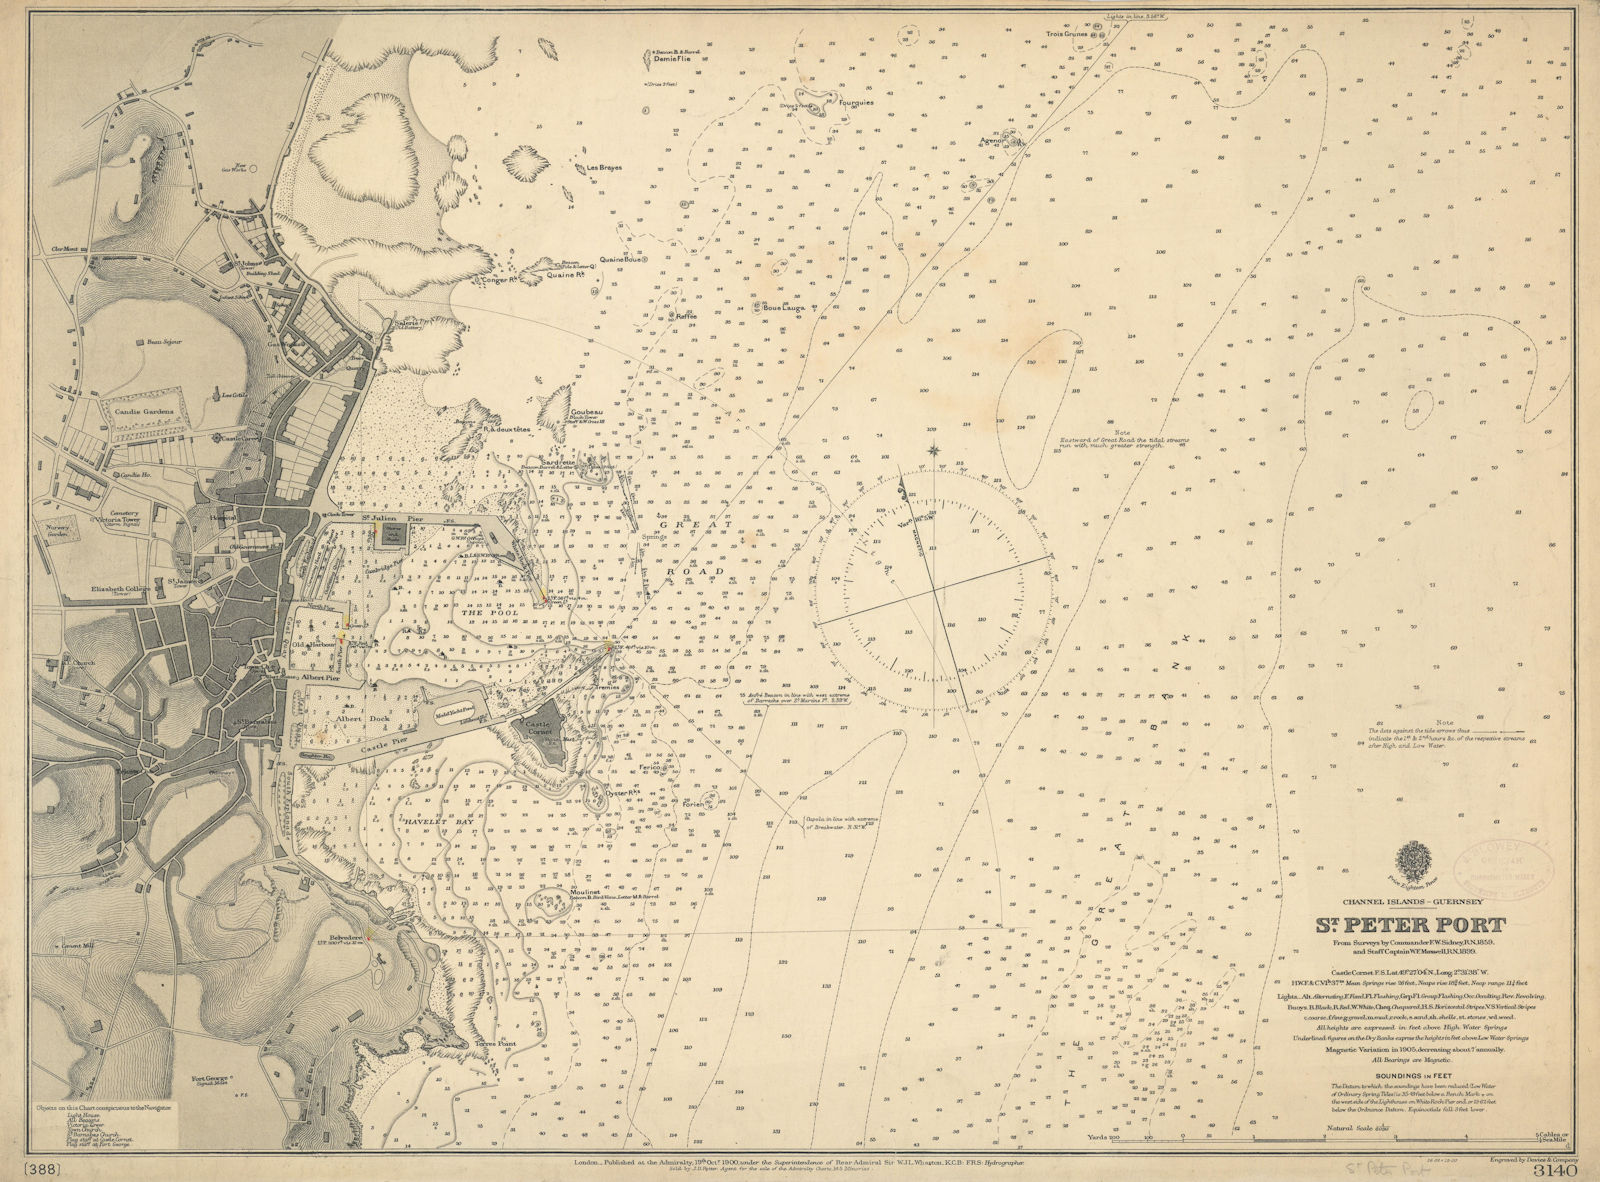 St. Peter Port, Guernsey, Channel Islands. ADMIRALTY sea chart 1900 old map